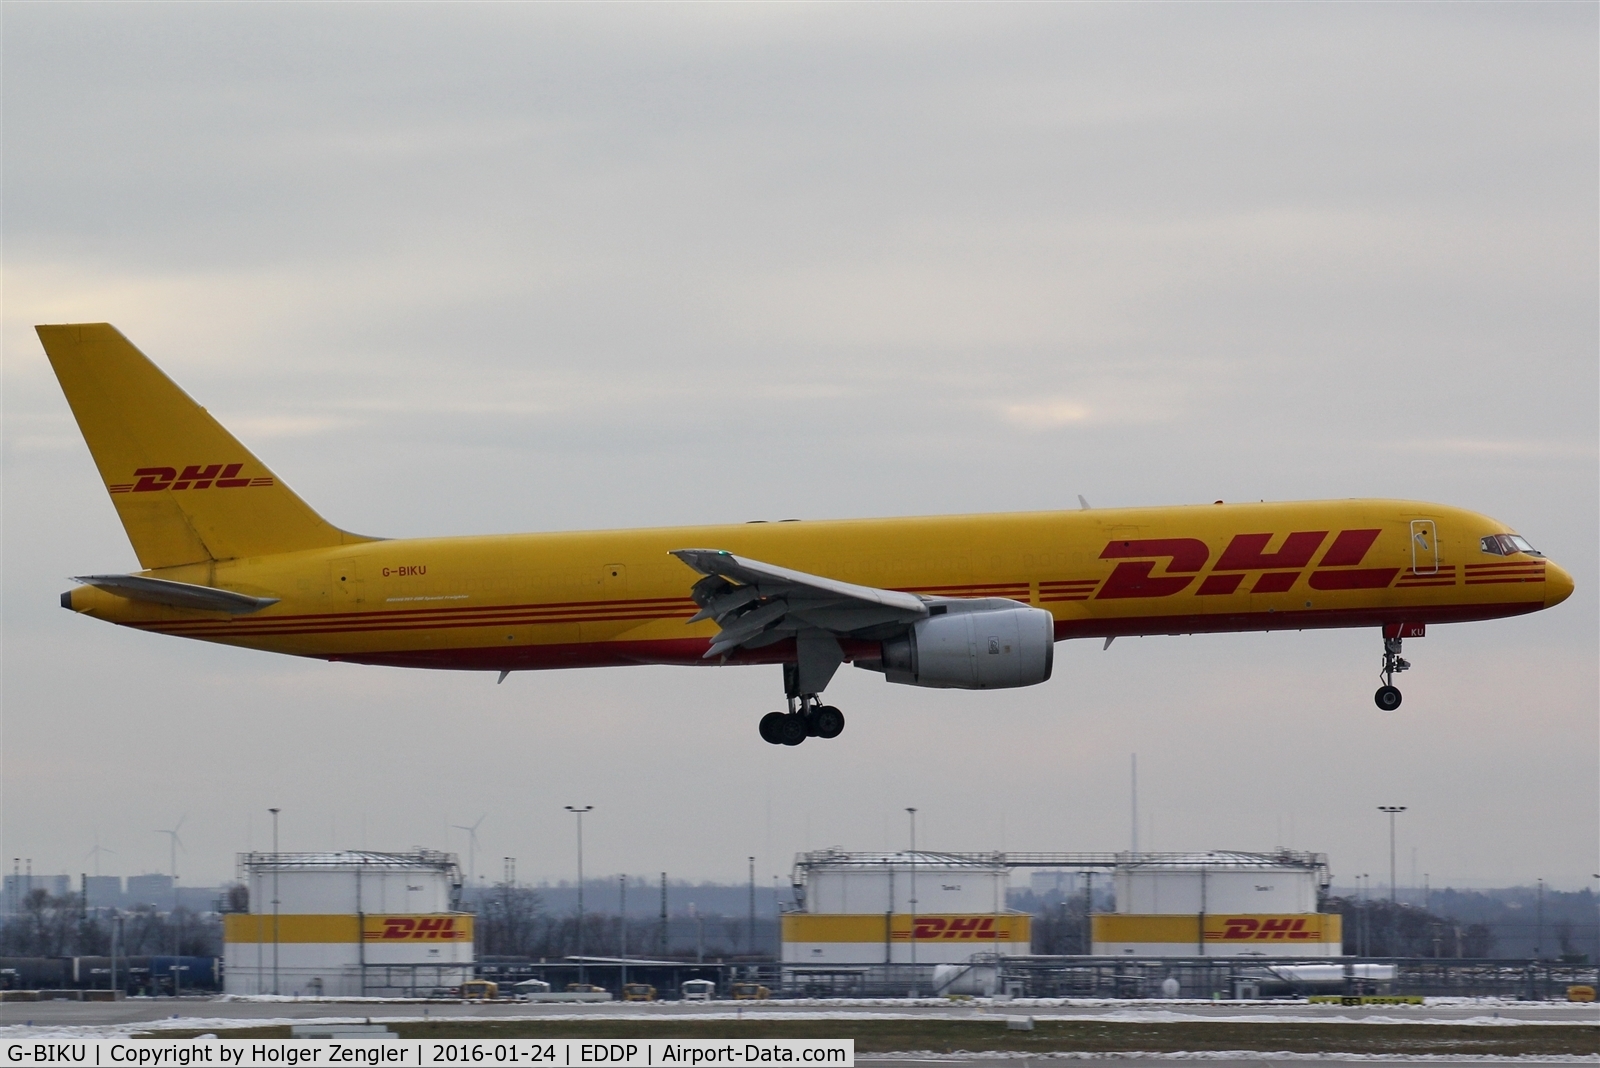 G-BIKU, 1985 Boeing 757-236/SF C/N 23399, DHL is everywhere, on the ground and in the air....